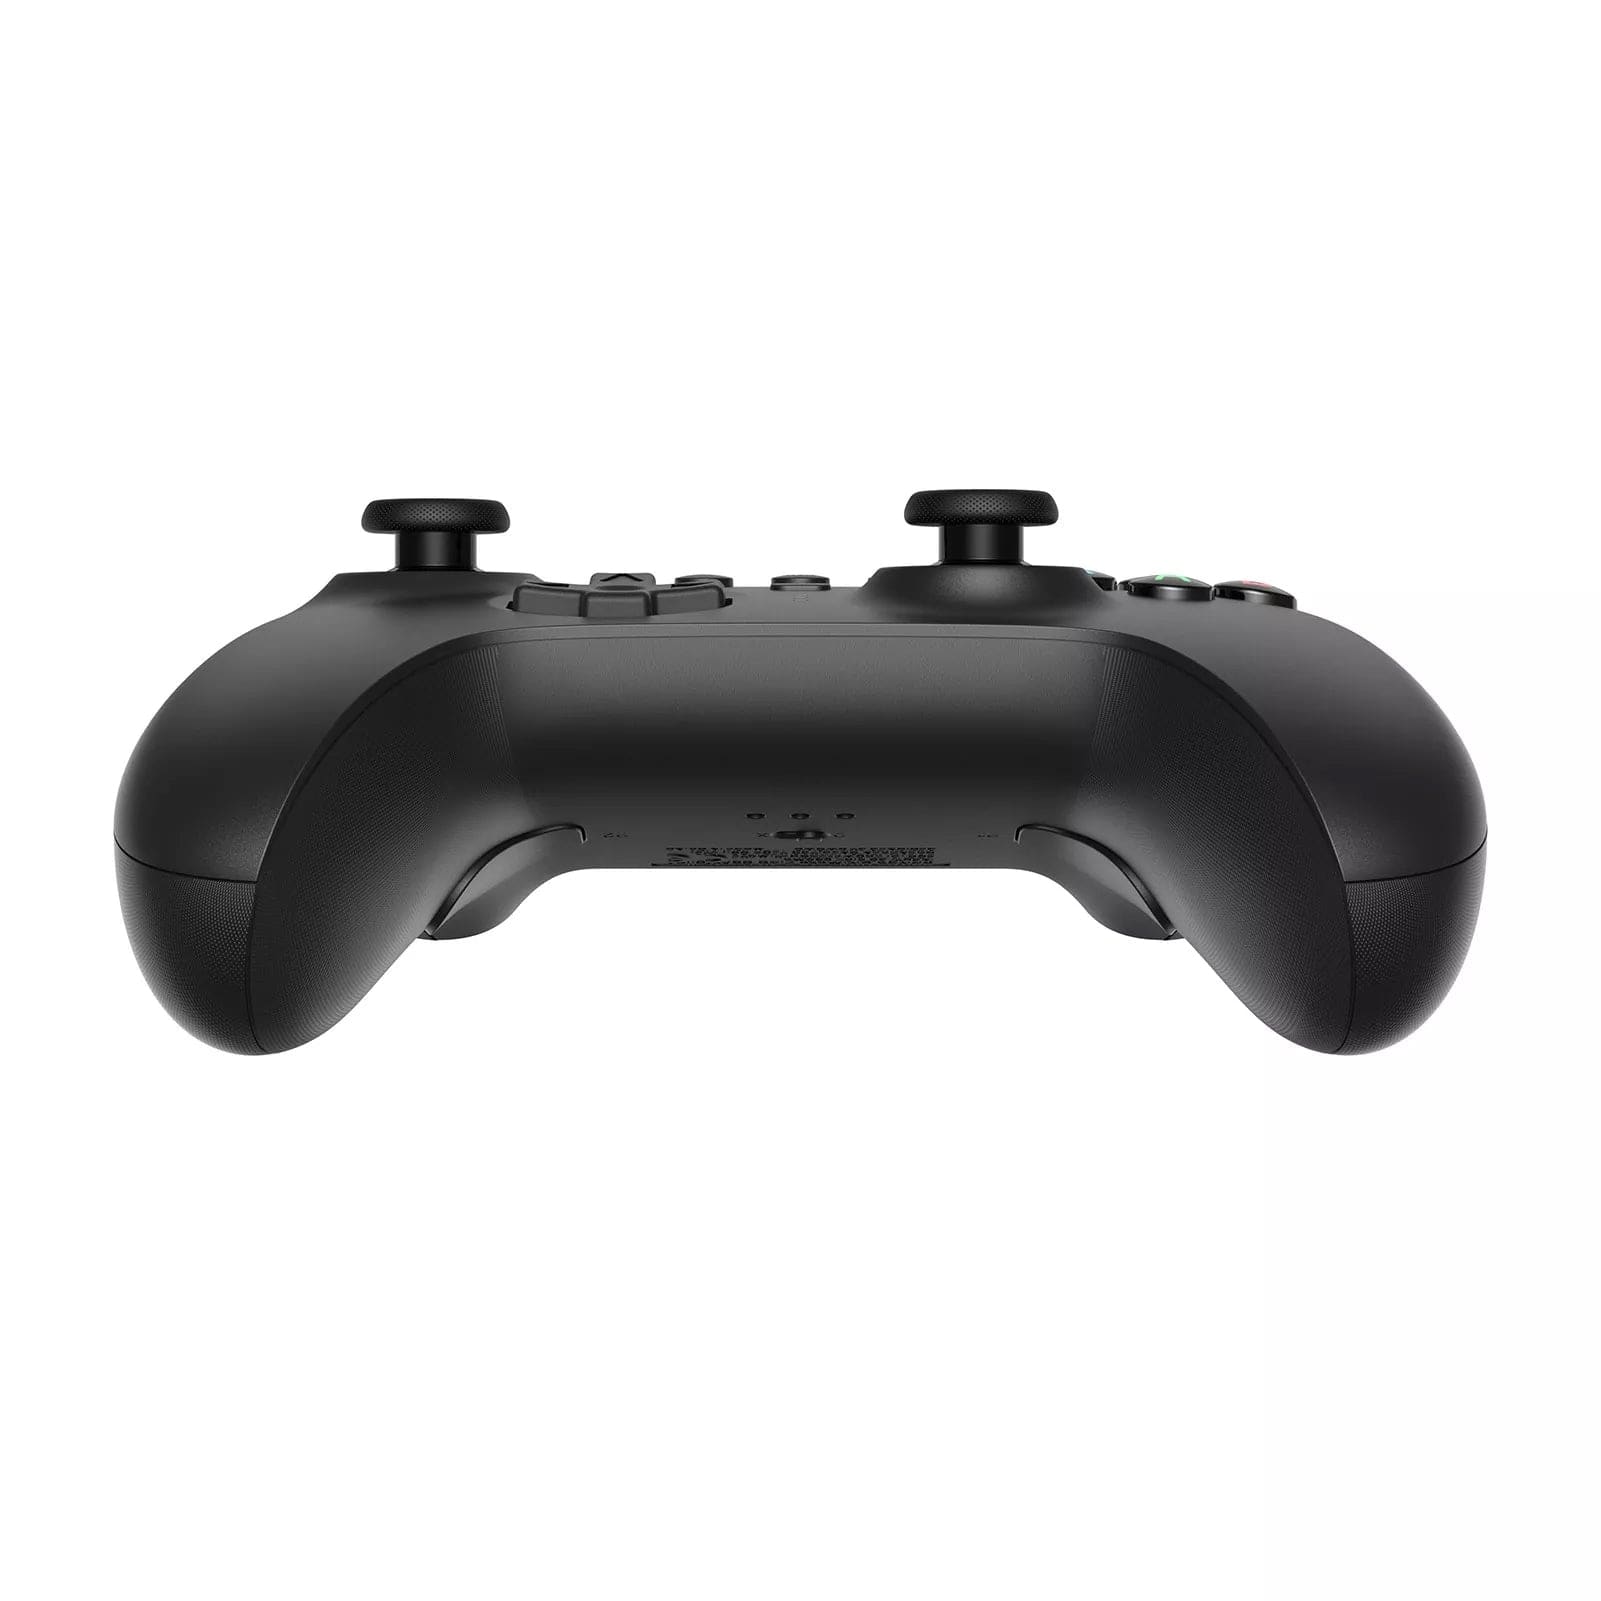 8BitDo Ultimate 2.4G Controller with Charging Dock - Black - The Pi Hut